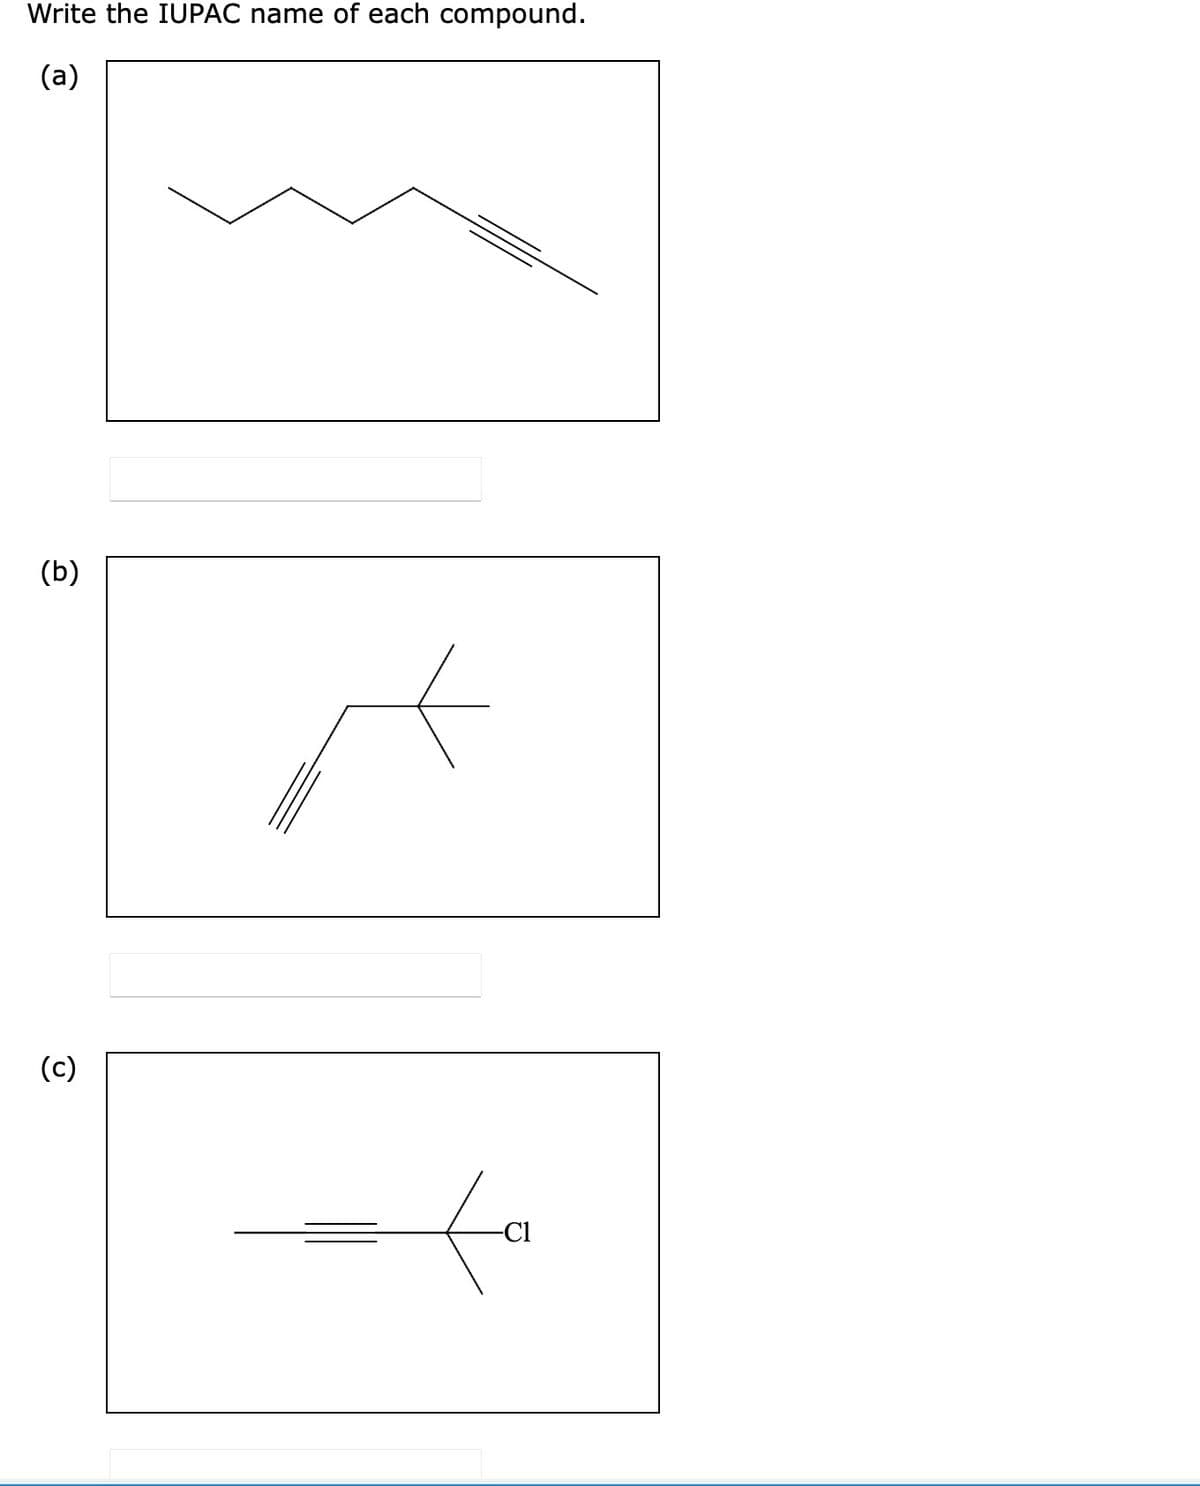 Write the IUPAC name of each compound.
(a)
(b)
(c)
-Cl